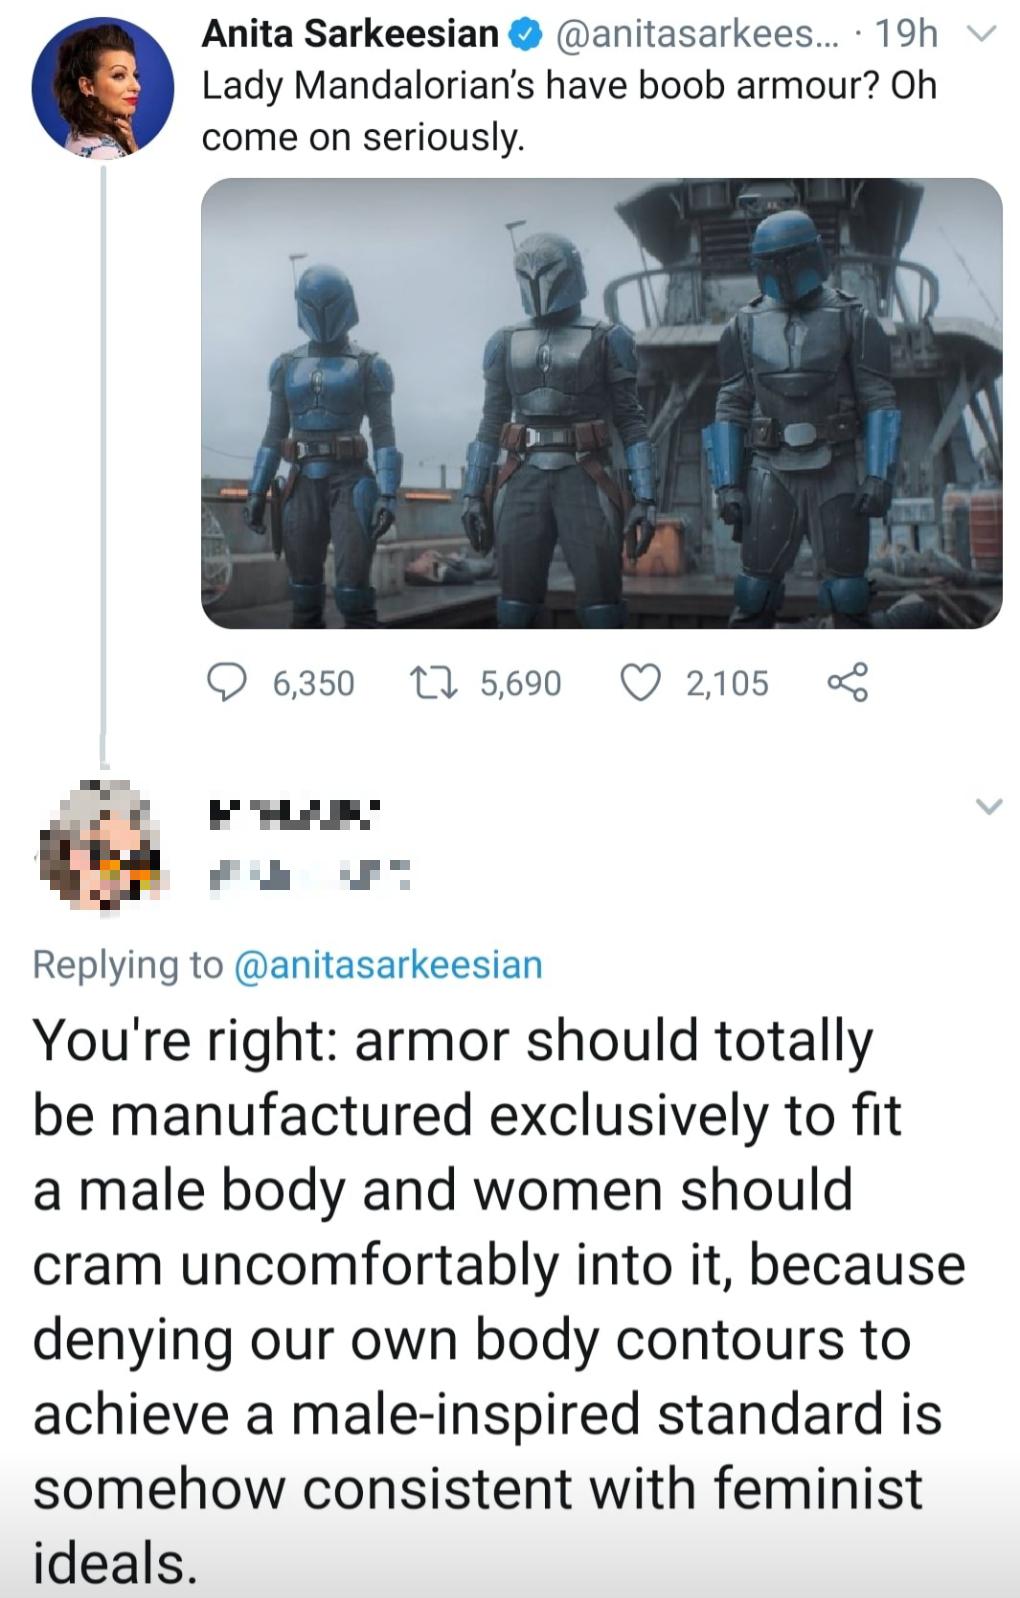 anita sarkeesian boob armor - Anita Sarkeesian ... 19h Lady Mandalorian's have boob armour? Oh come on seriously. 6,350 12 5,690 2,105 You're right armor should totally be manufactured exclusively to fit a male body and women should cram uncomfortably int